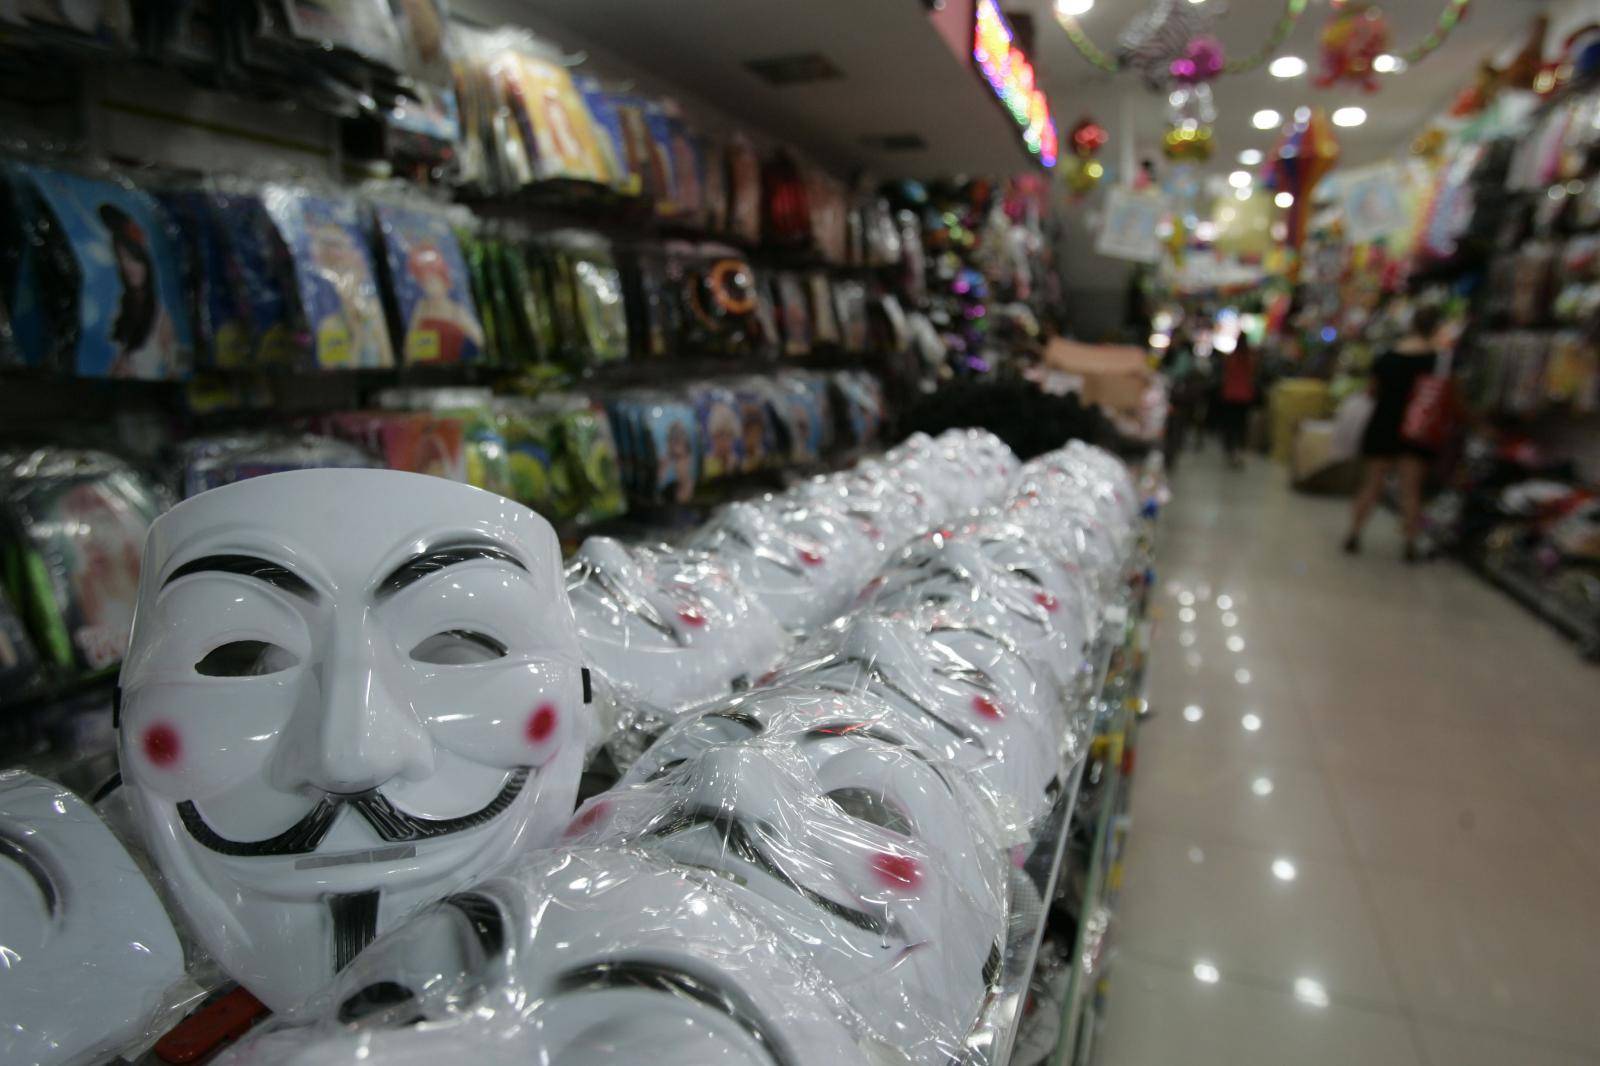 During the demonstrations that take account of Brazil, the mask associated with the hacker group Anonymous took to the streets as a symbol of rebellion.